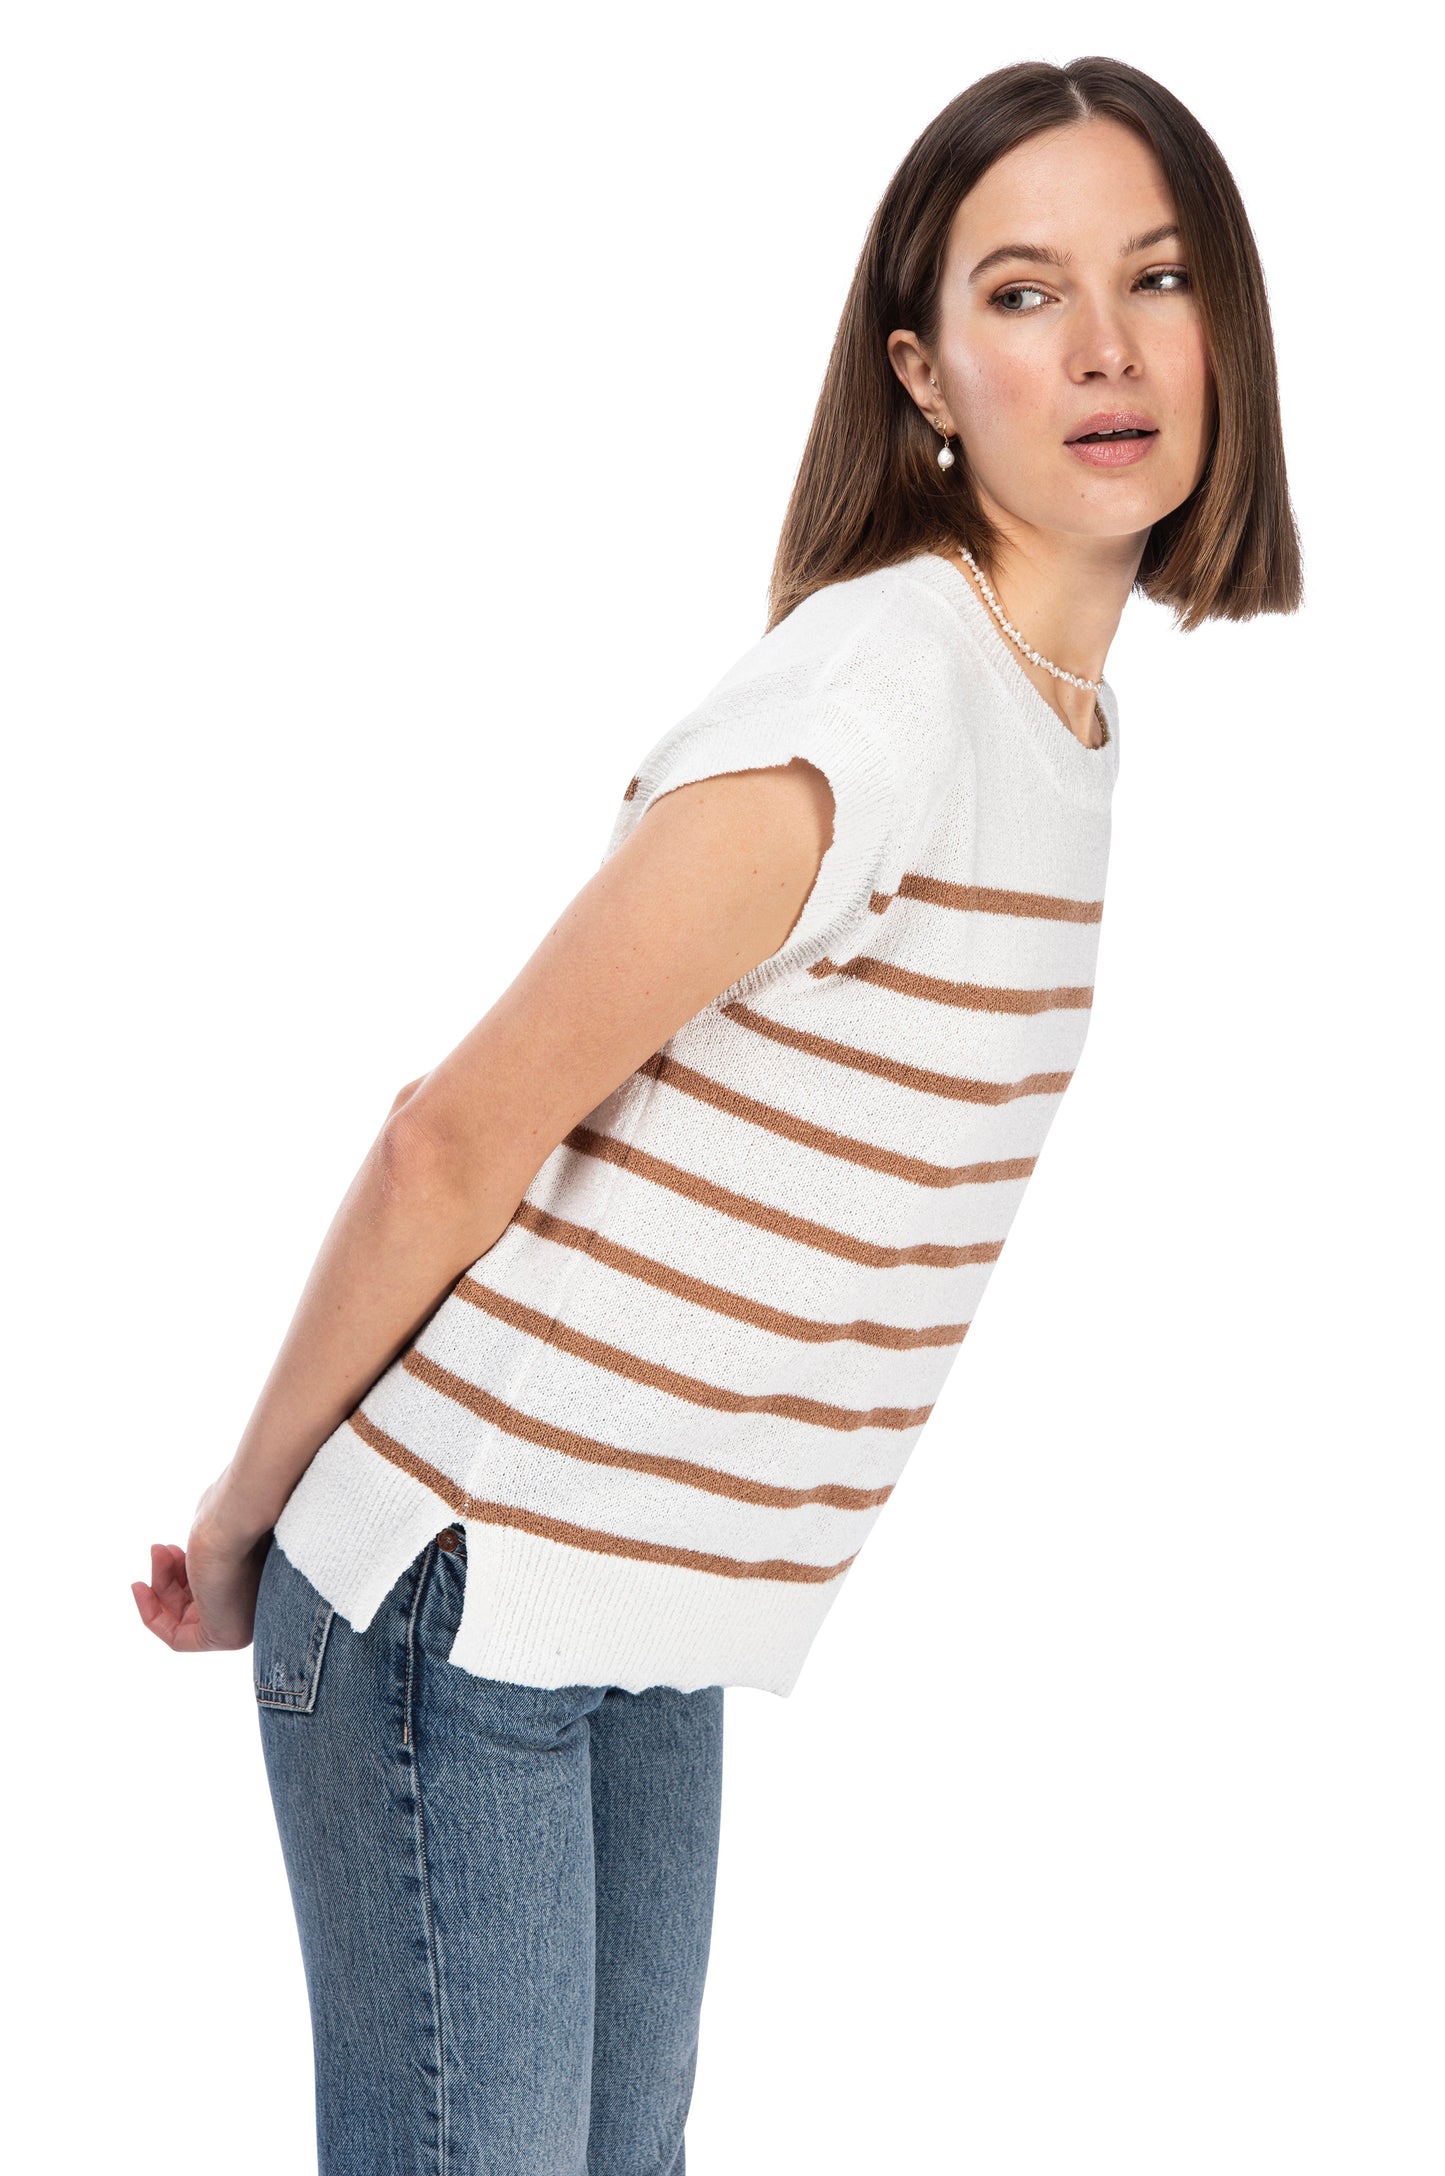 A woman in a casual B Collection by Bobeau crew neck stripe sweater top and jeans standing sideways, with one hand in her back pocket, and looking towards the camera with a subtle expression.